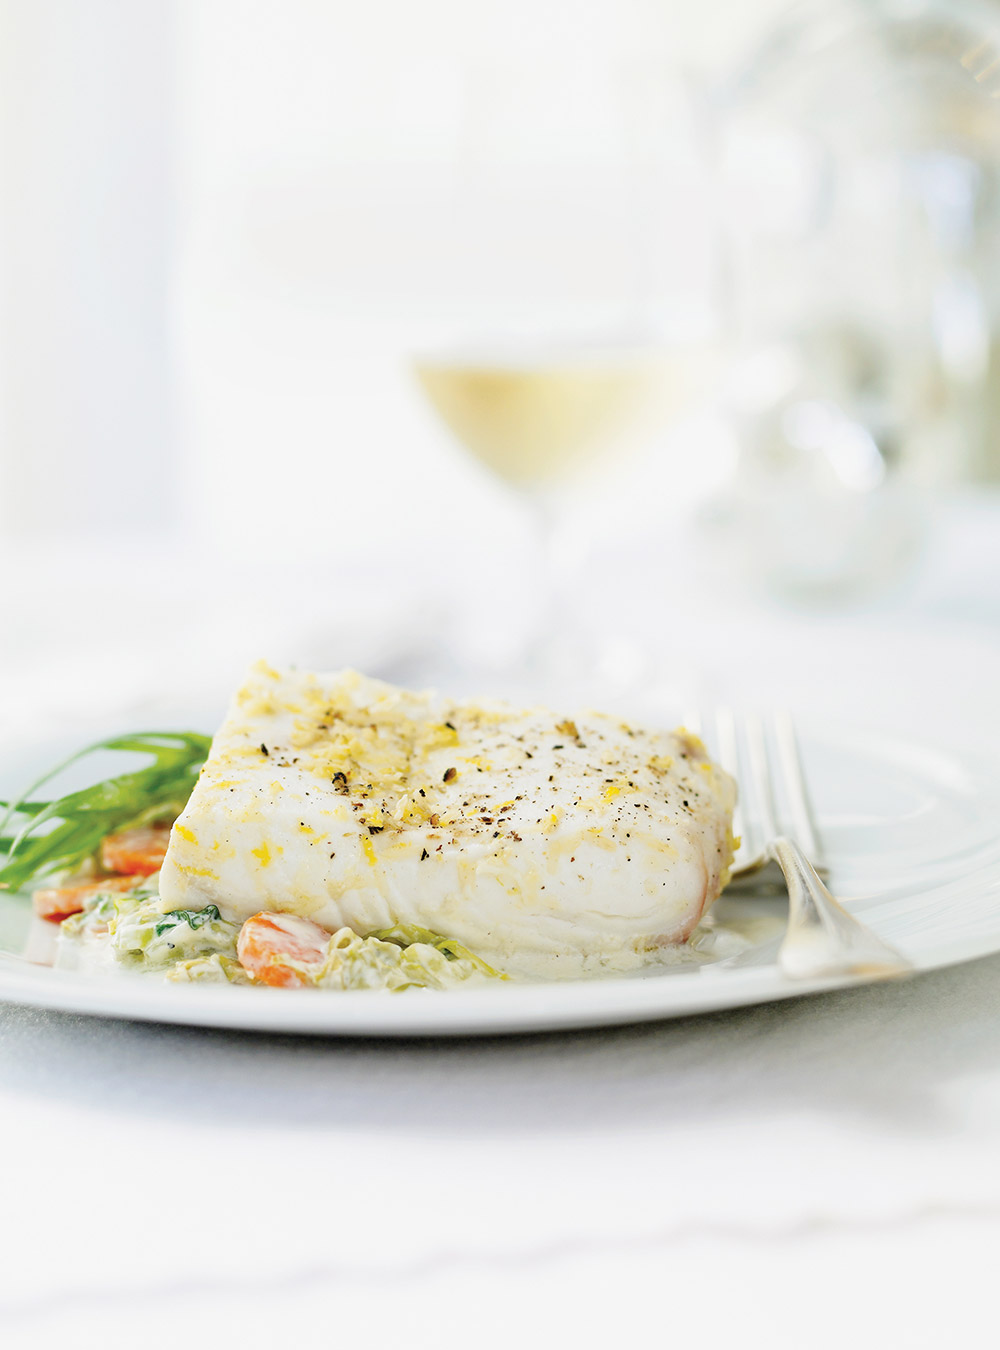 Steamed Halibut with Horseradish and Vodka